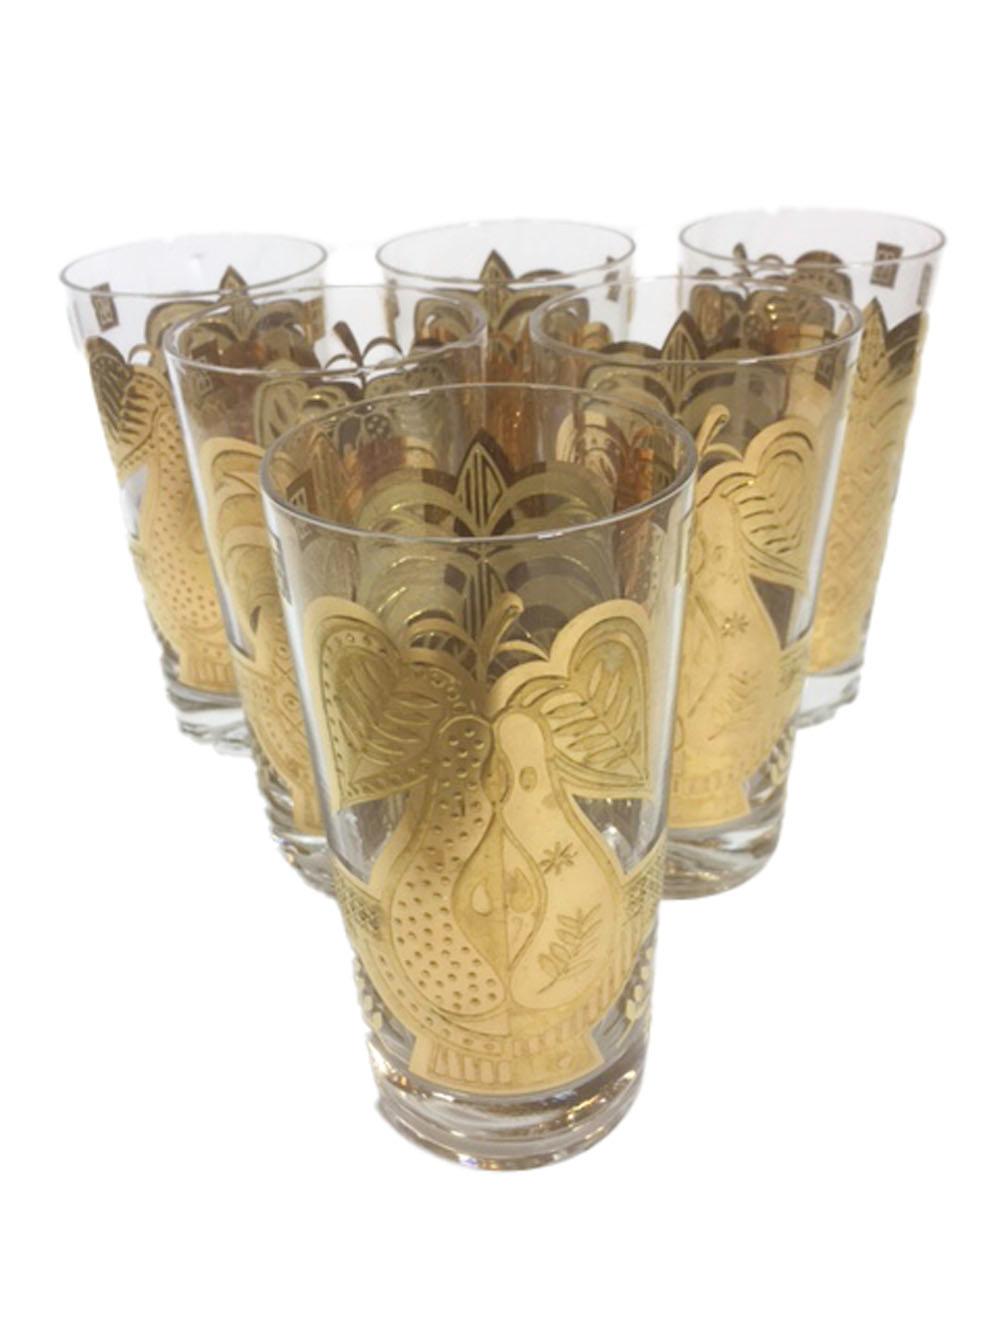 Set of 6 mid-century highball glasses designed by Georges Briard. Decorated in 22 karat gold with gloss and satin finish embossed with a large pineapple on one side and halved pear on the other. All in excellent condition.